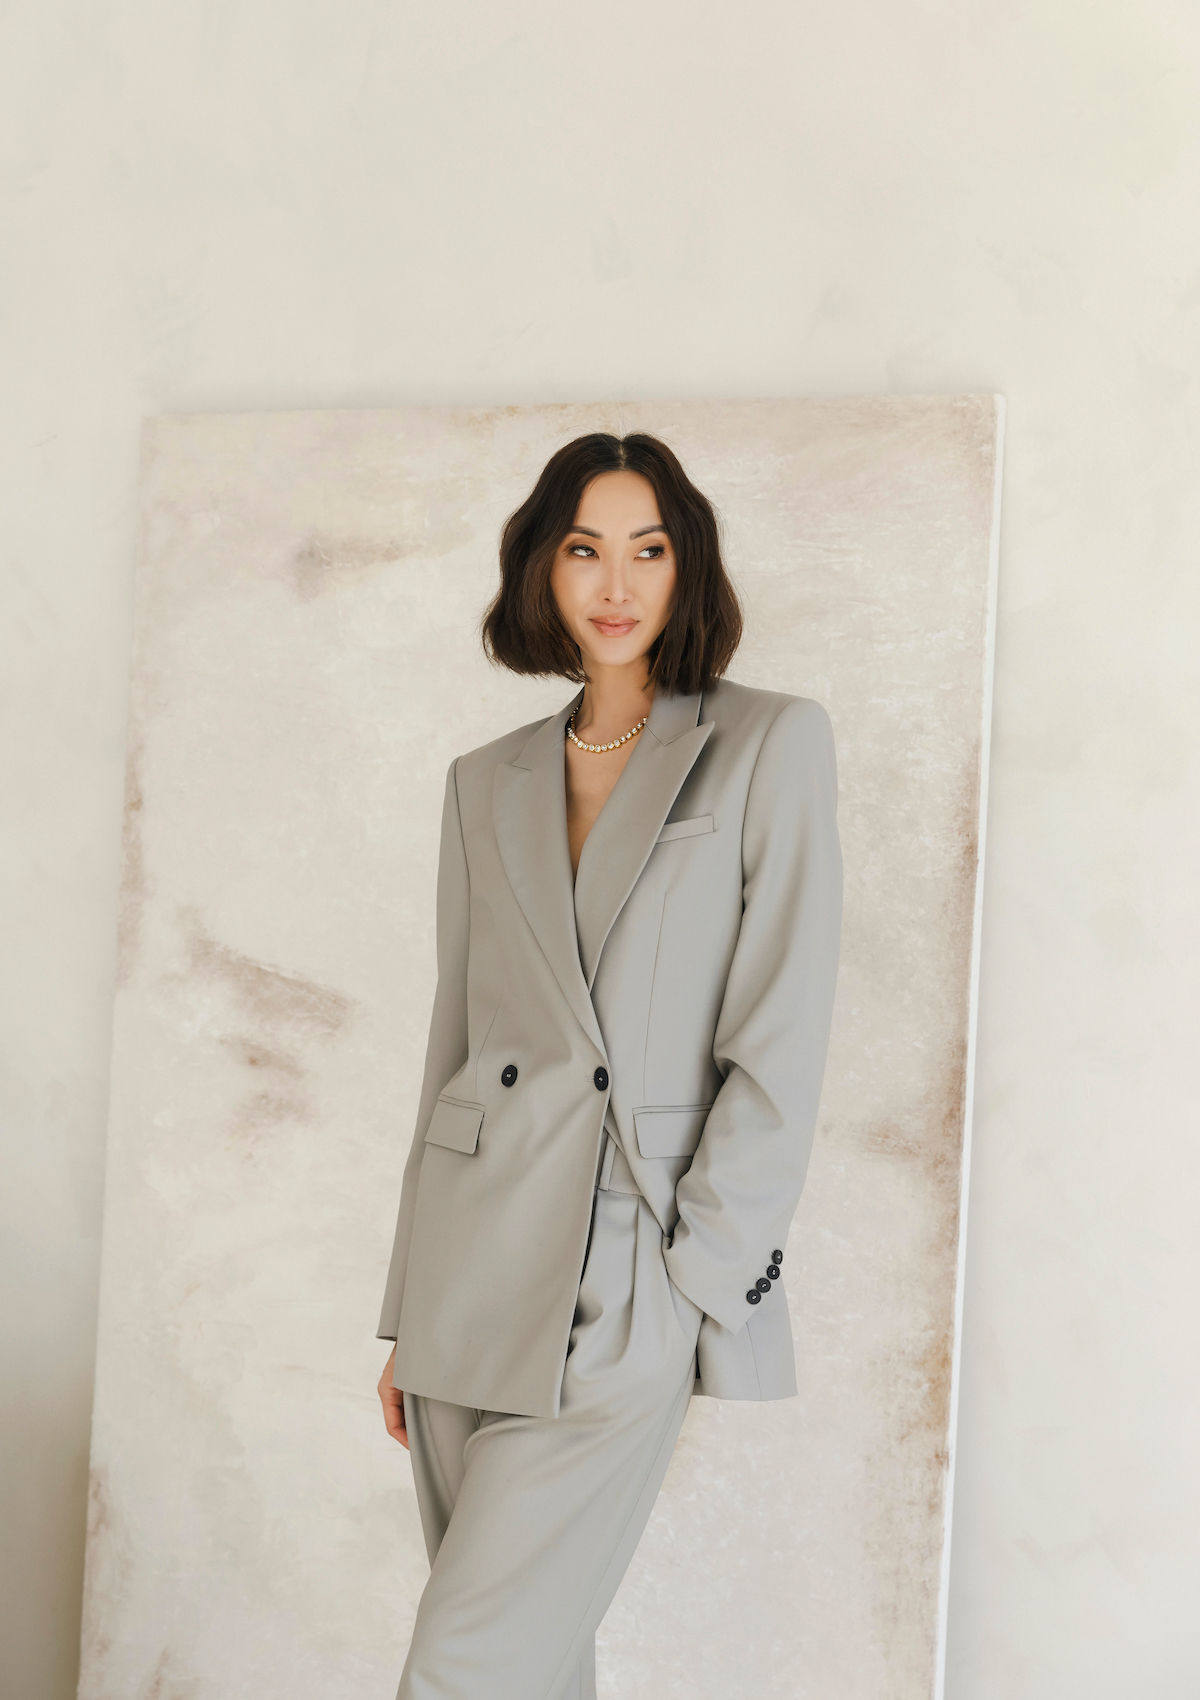 Chriselle Lim on life as a fashion digital creator, entrepreneur and mother